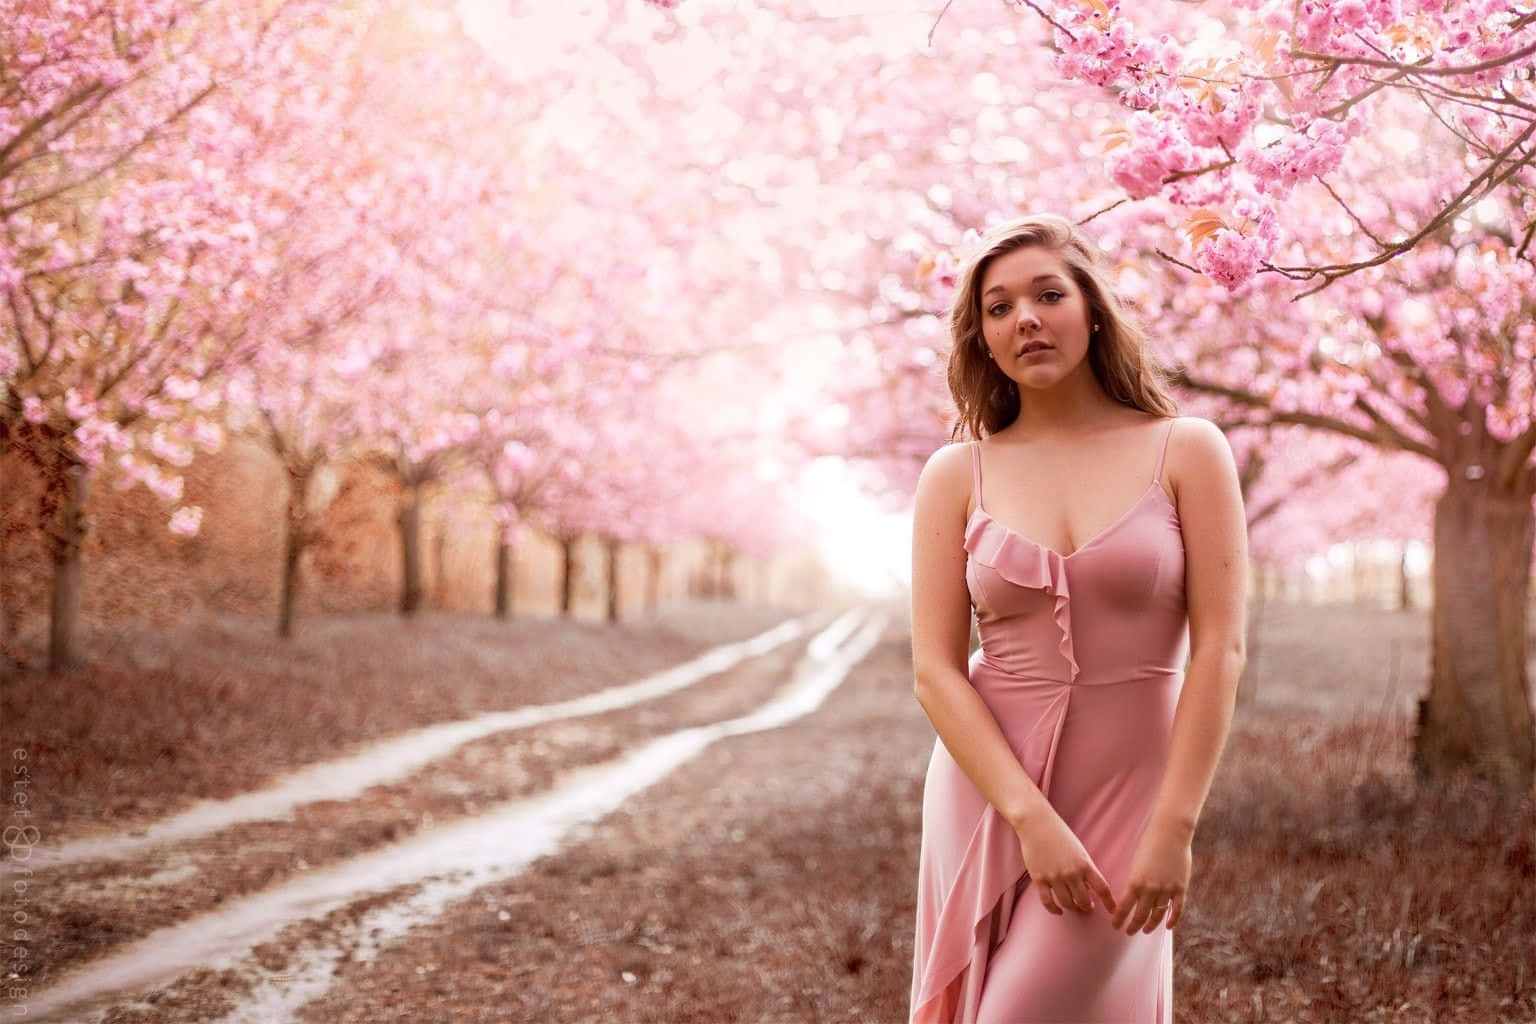 Curvy Woman During Cherry Blossoms Wallpaper